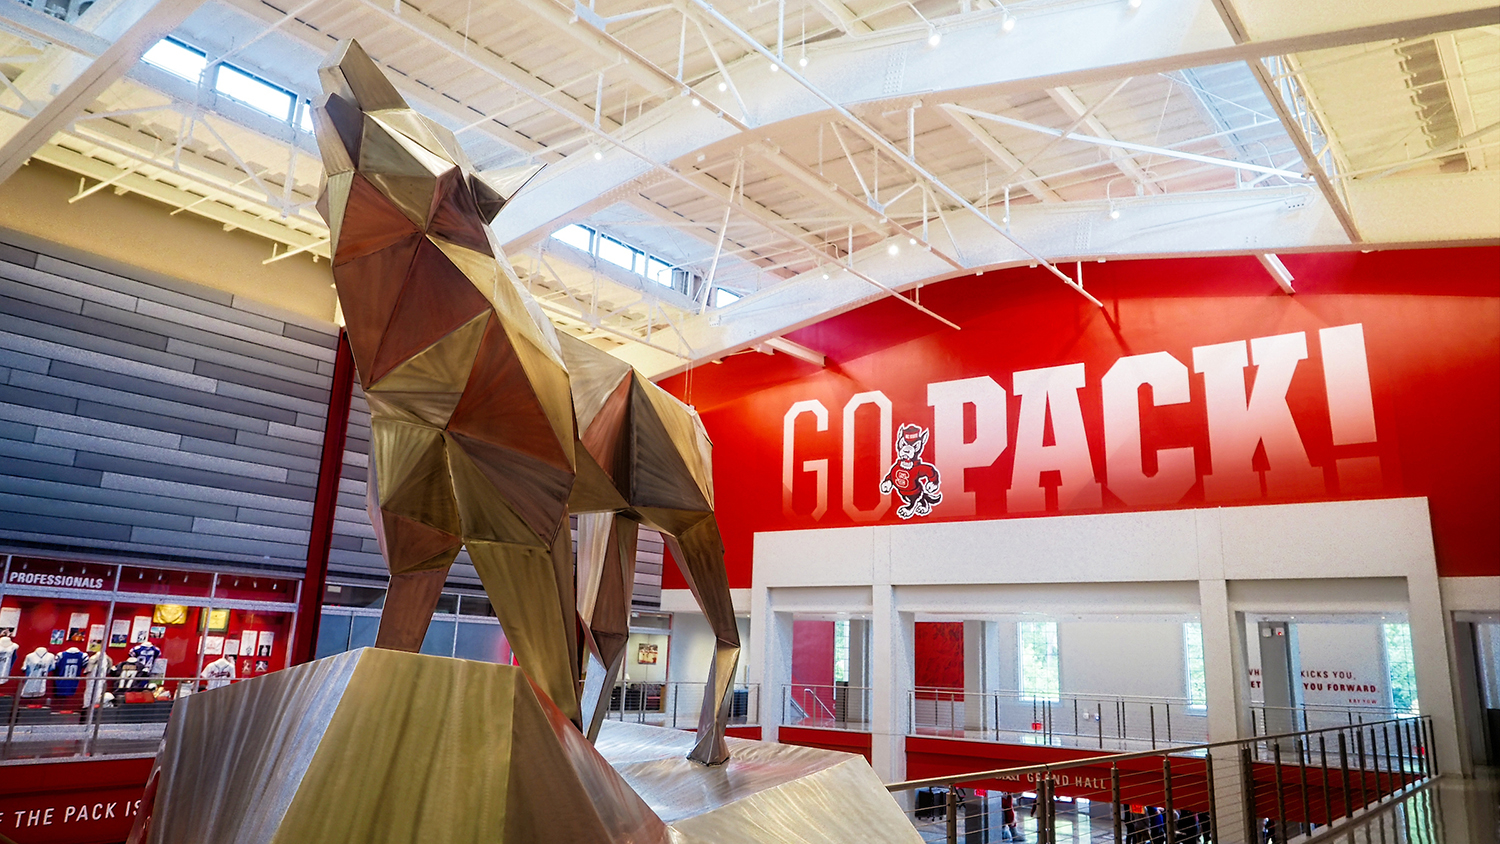 Photograph of the geometric wolf inside Reynolds Coliseum at NC State.